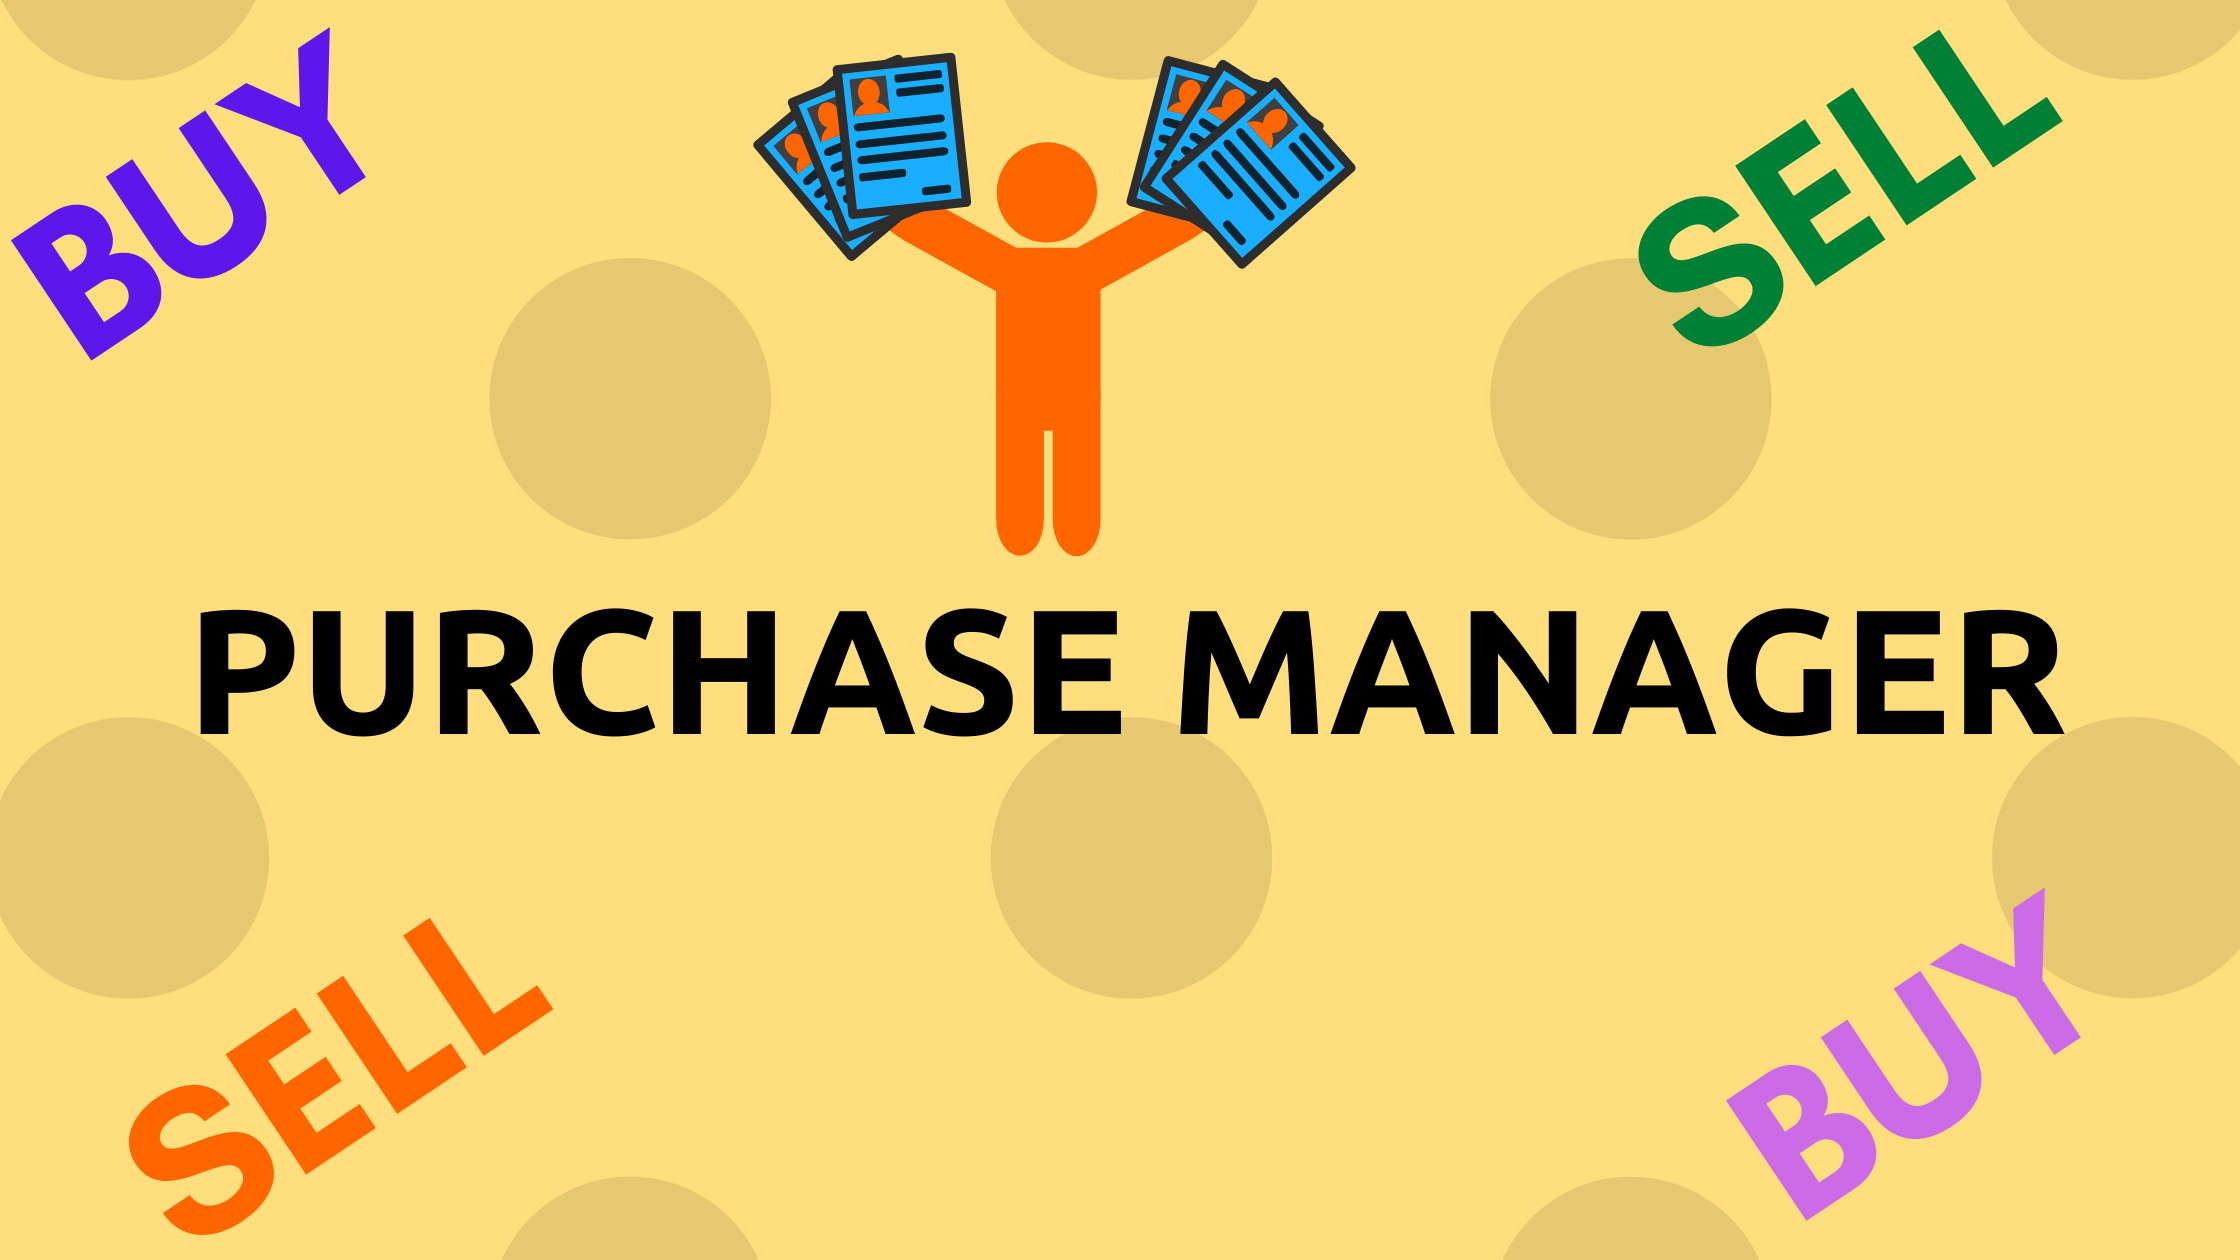 Role of Purchase Manager